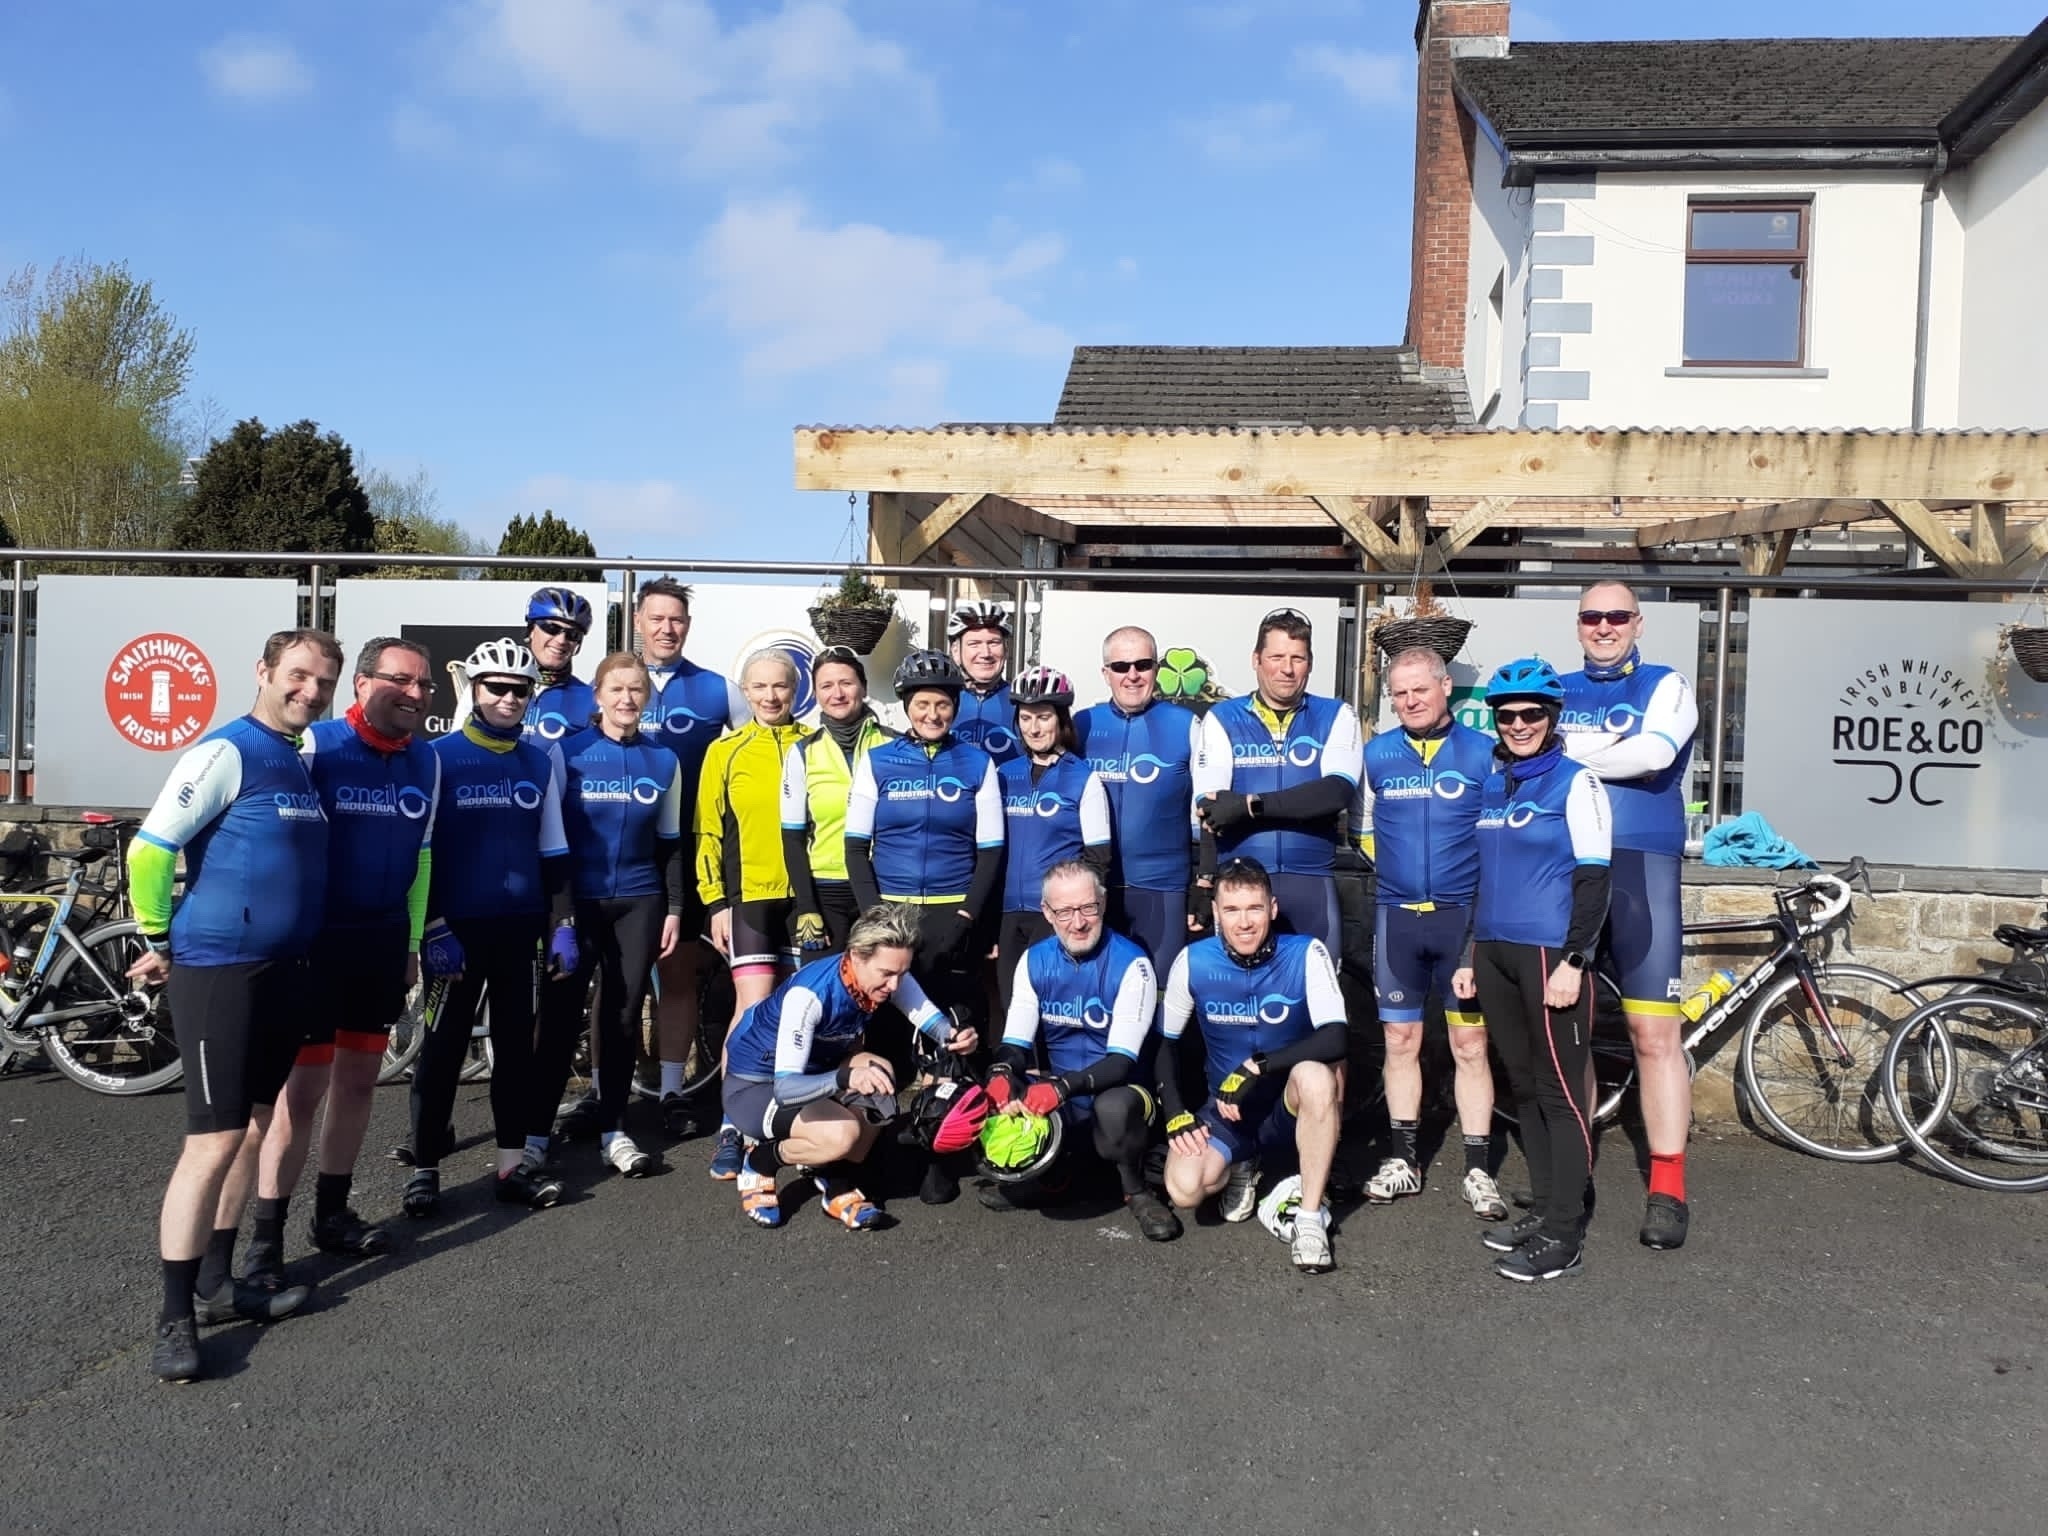 O Neill Industrial Charity - Group Of Cyclists partaking in the Charity Cycle.